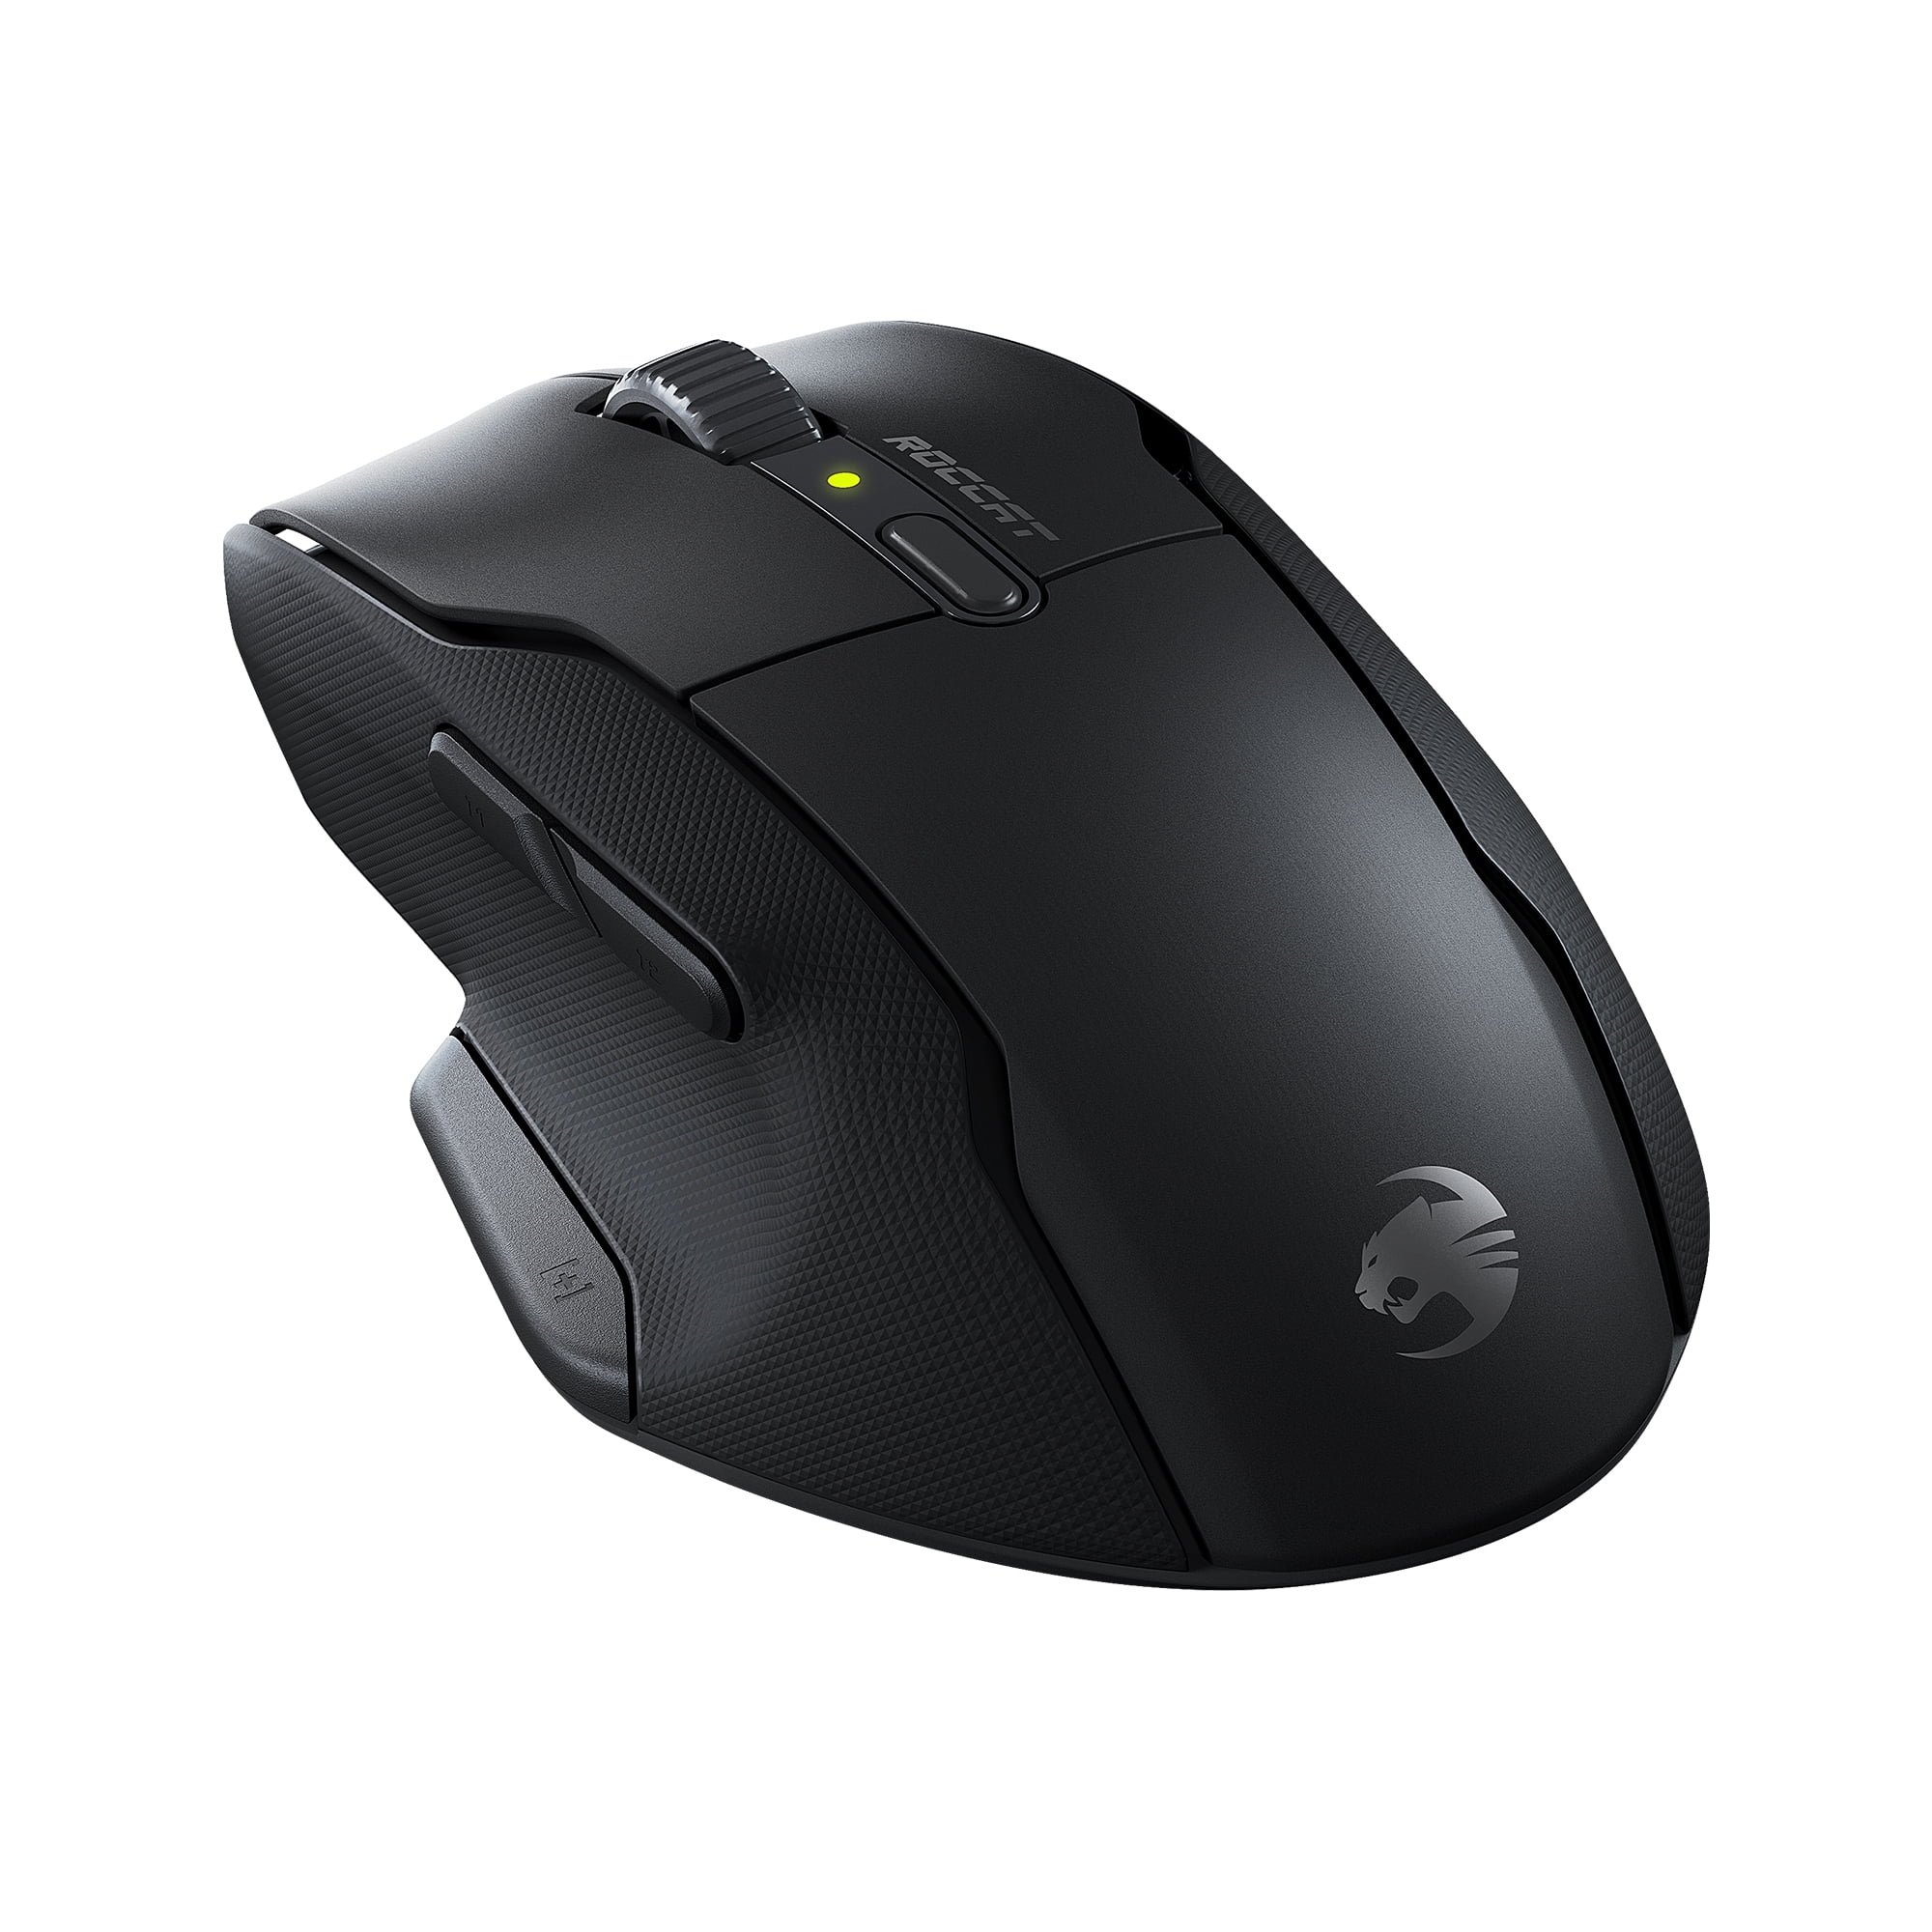 800-hour Rubber Sensor, Black With Mouse Design Double-Injected Wireless Battery Grips, Programmable Side Titan 19K Button & Optical Optical Ergonomic DPI Kone Life, Gaming Switches - - Air ROCCAT